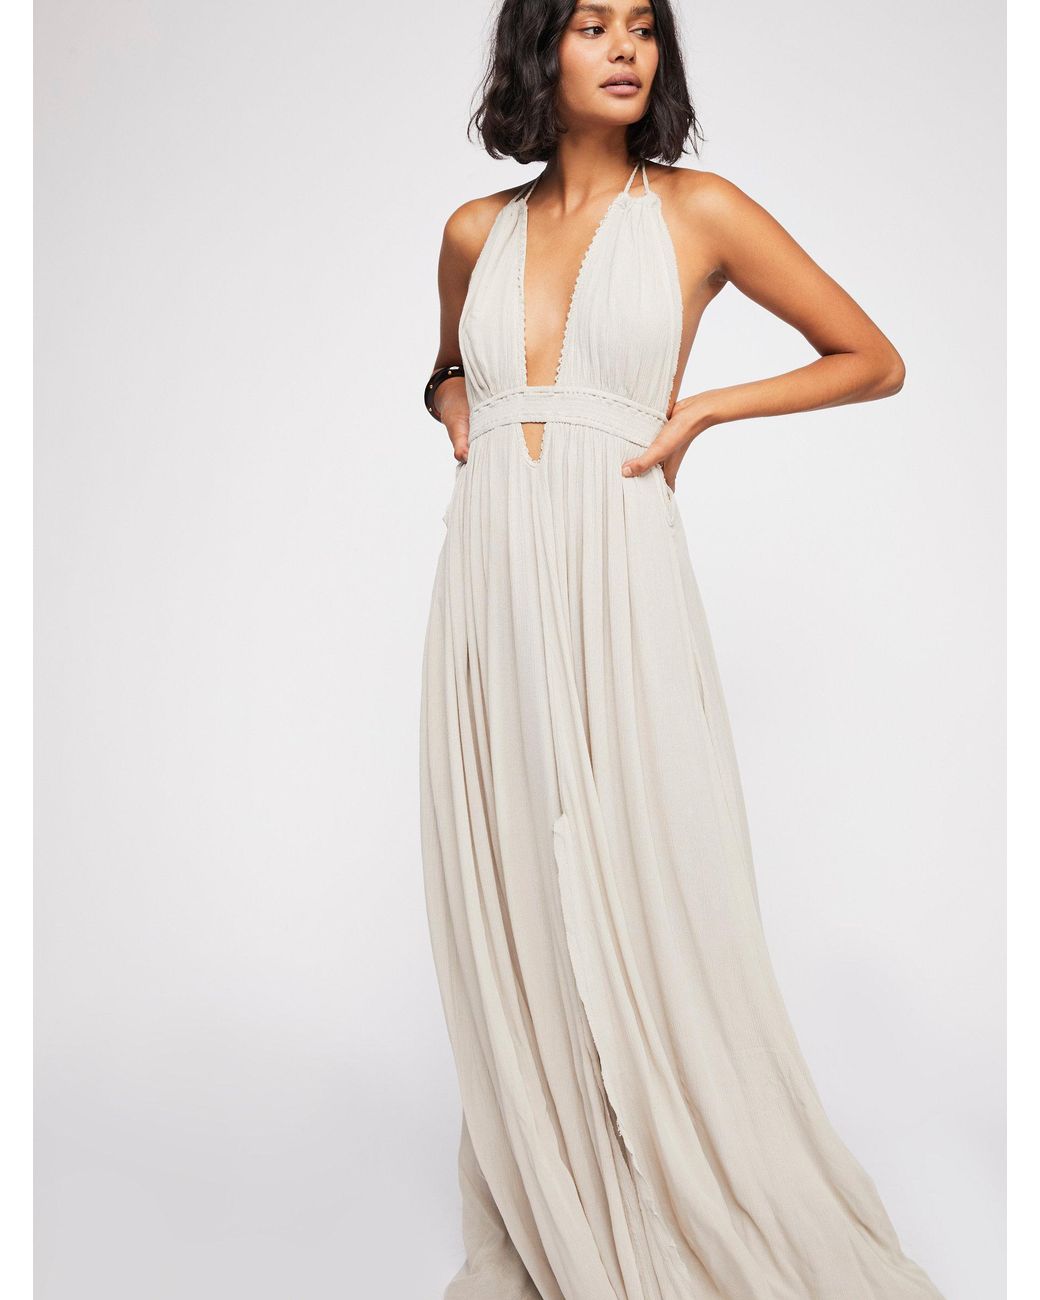 Free People Look Into The Sun Maxi Dress in White | Lyst